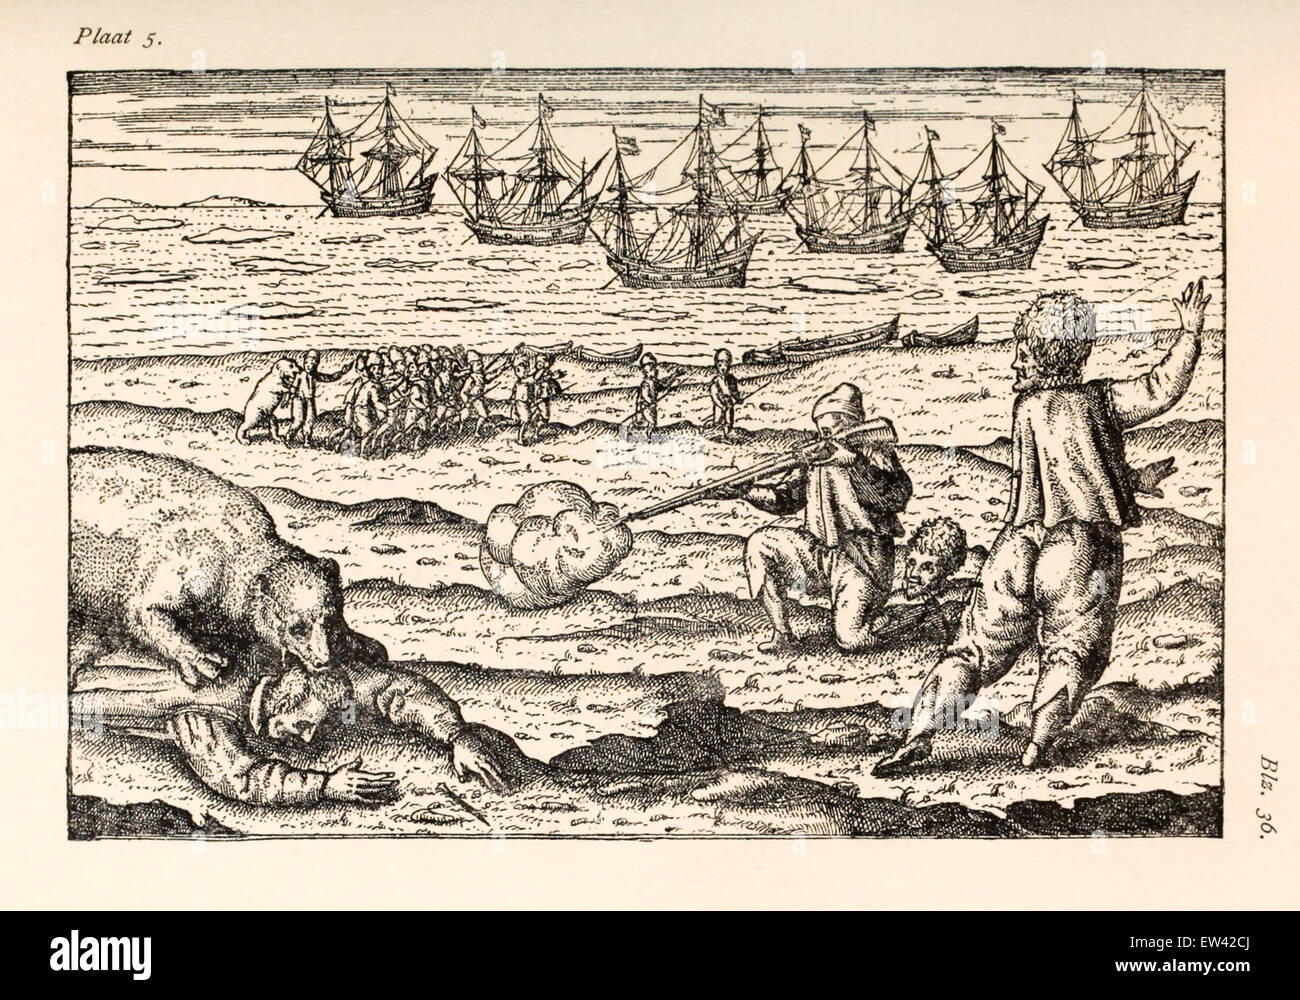 Scene from third voyage, crew attacked by polar bear. Willem Barentsz (1550-1597) illustration by Henricus Hondius (1573 –1650). See description for more information. Stock Photo